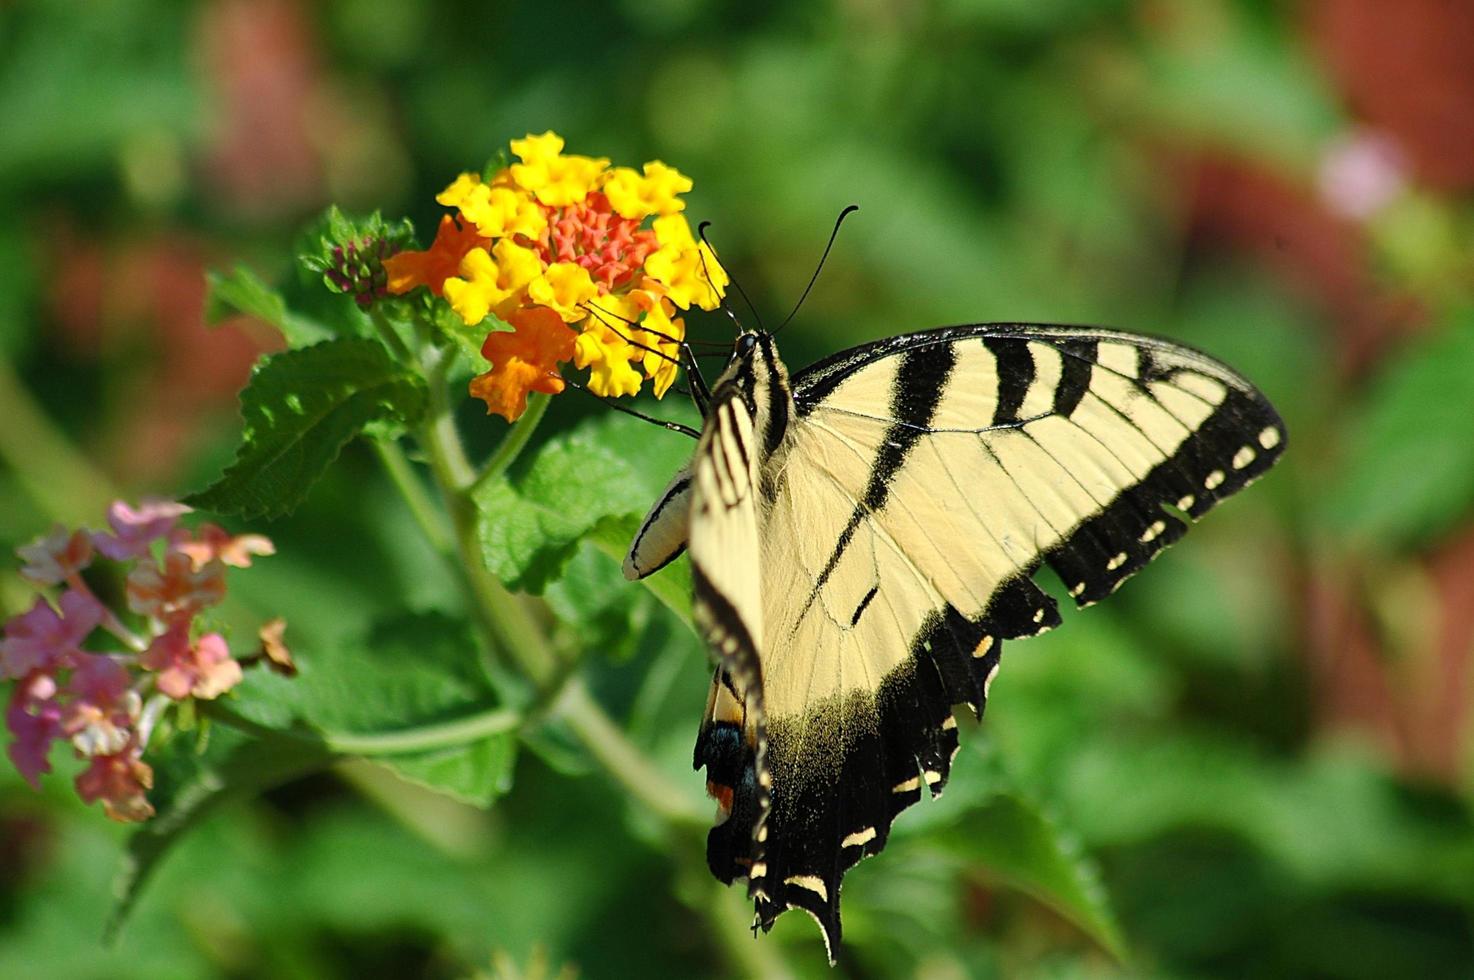 Tiger swallowtail butterfly photo